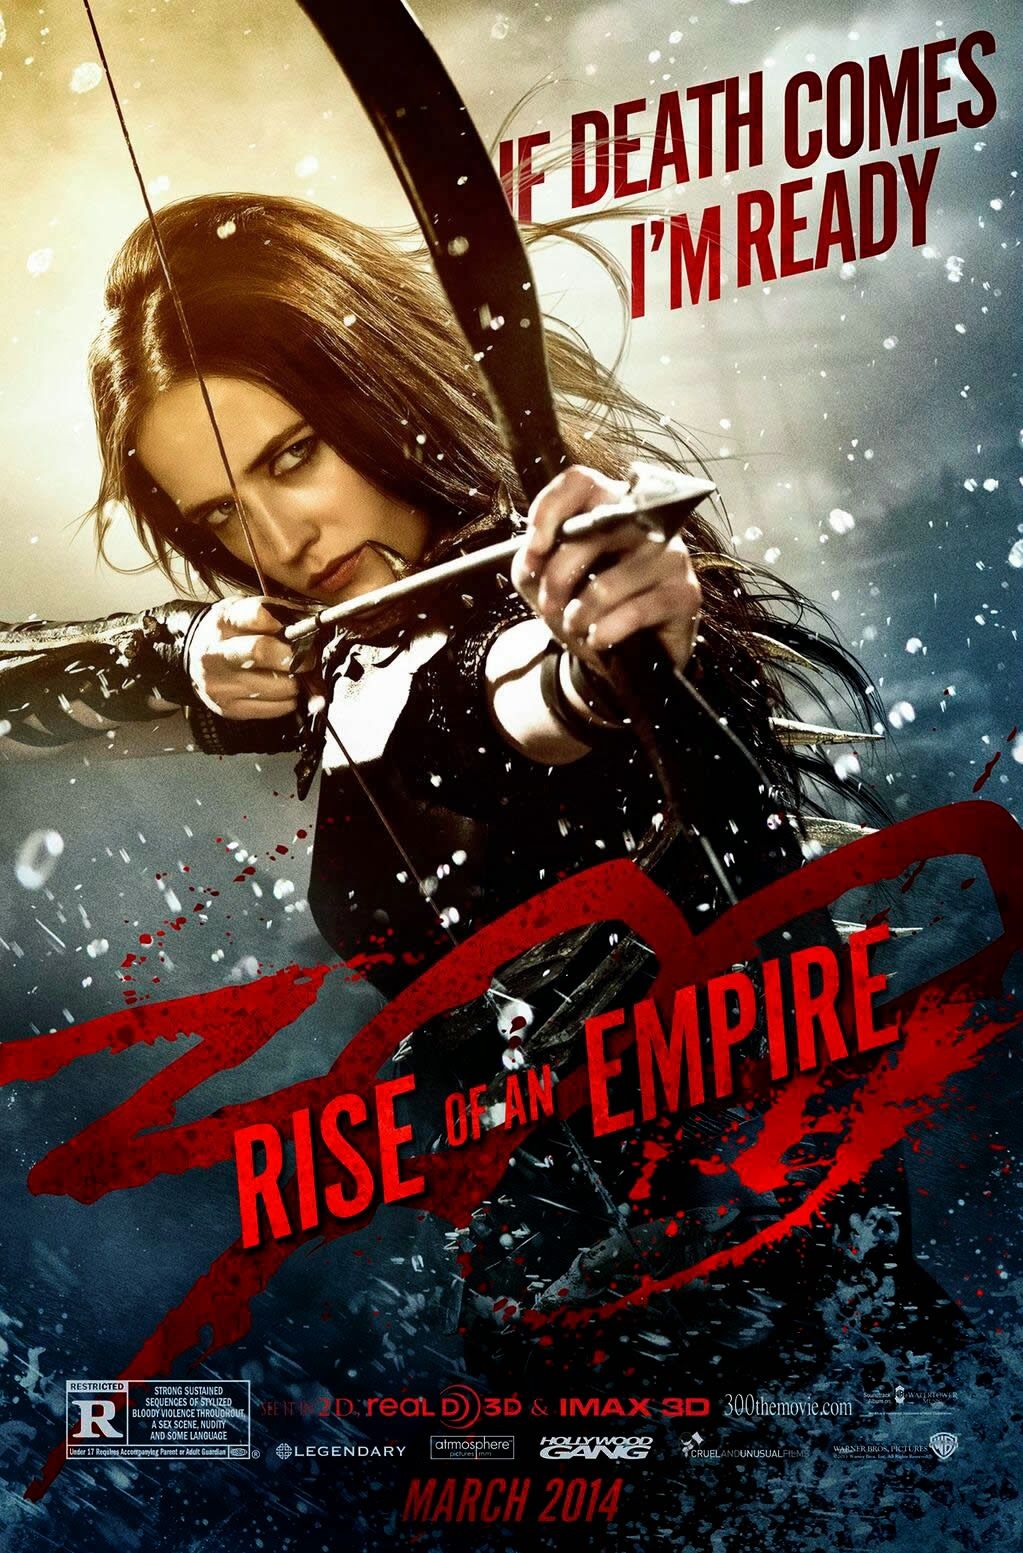 sequel to rise of an empire movie